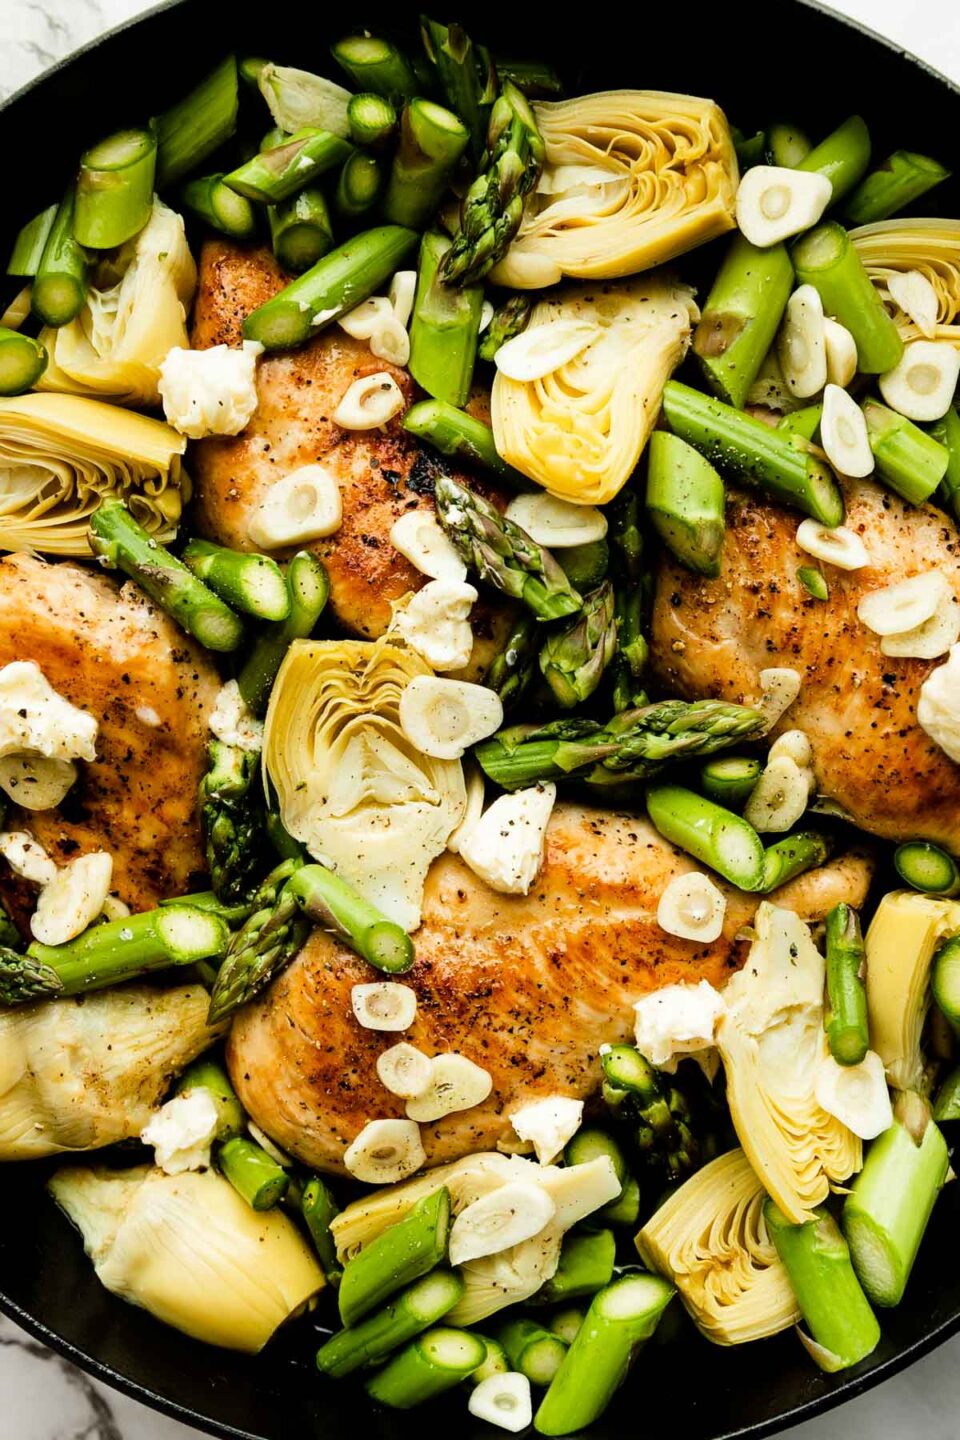 An overhead shot of the assembled lemon chicken skillet, with browned chicken breast, chopped asparagus, artichoke hearts and garlic.